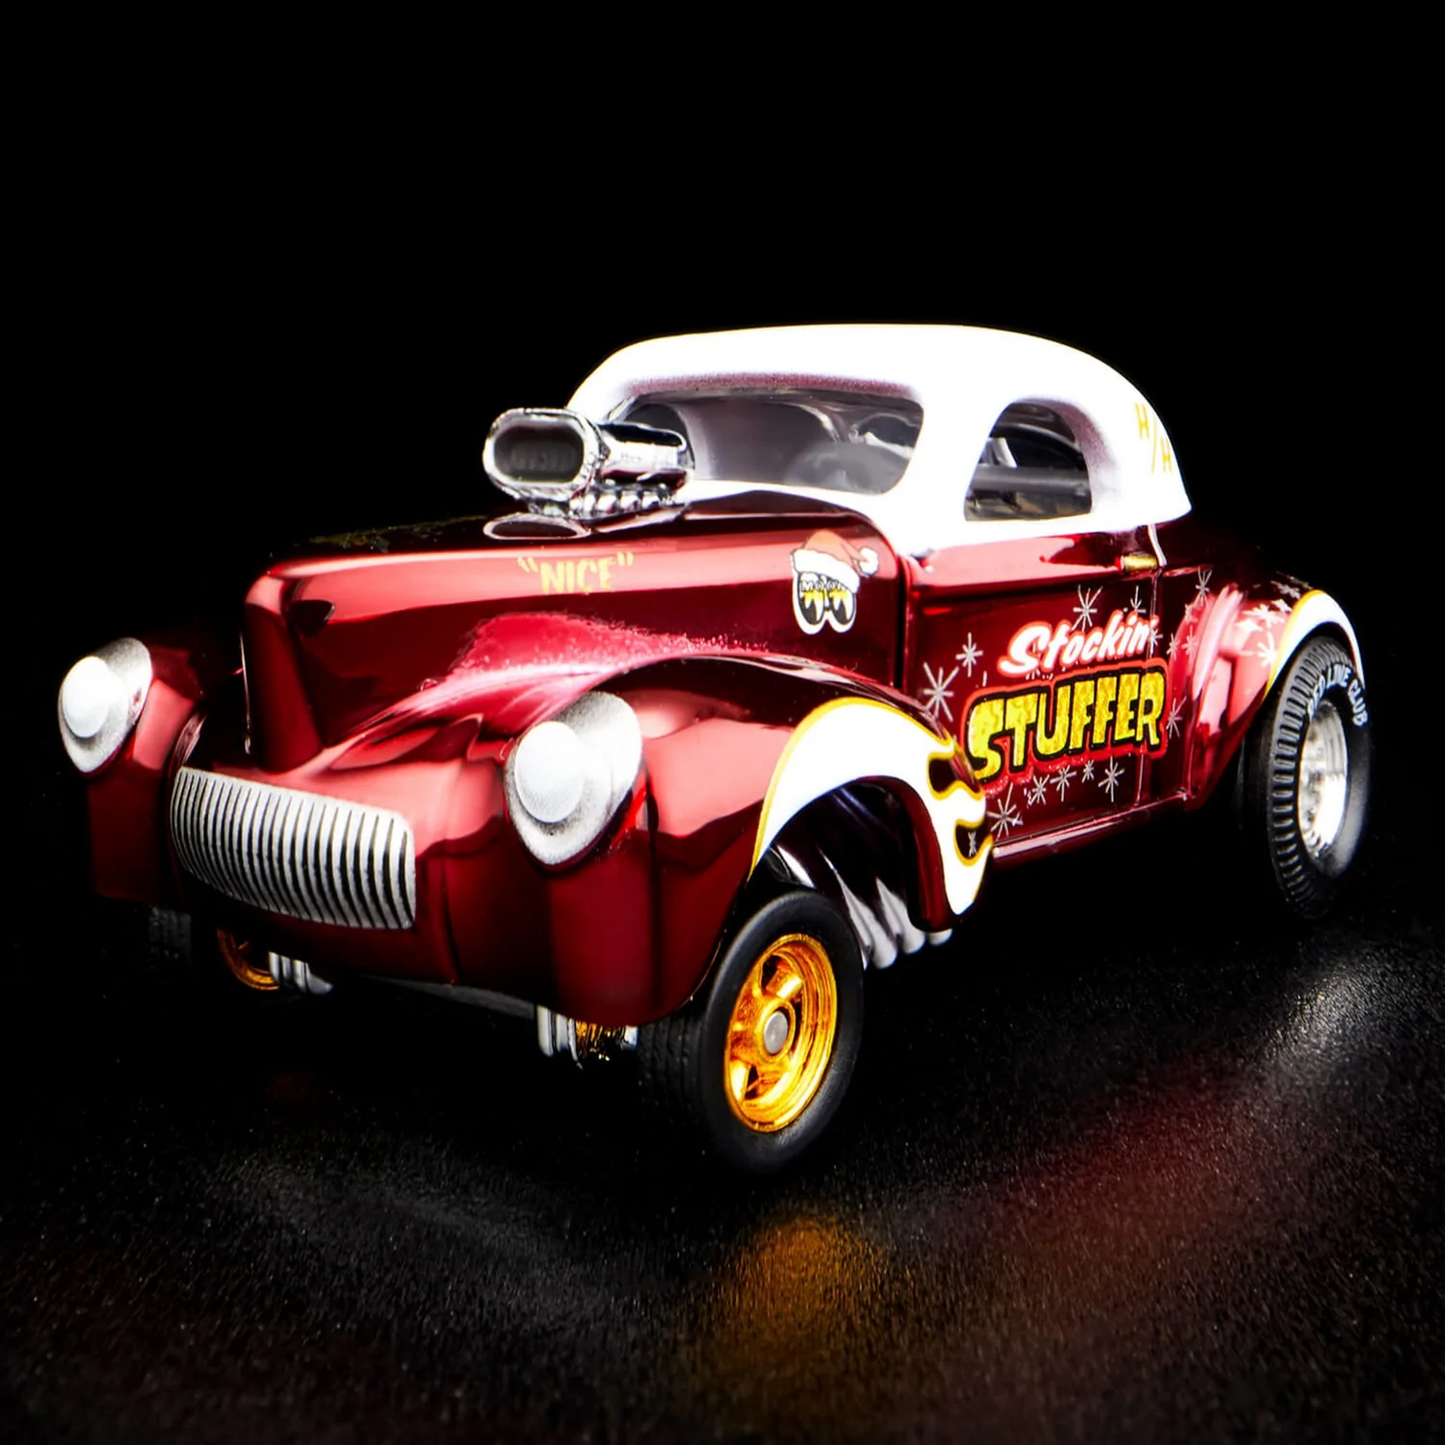 Hot Wheels 2022 - RLC Exclusive / Holiday Car / Stocking Stuffer - '41 Willys Gasser - Spectraflame Red - Metal/Metal & Real Riders - Acrylic Display Case - Limited to 30,000